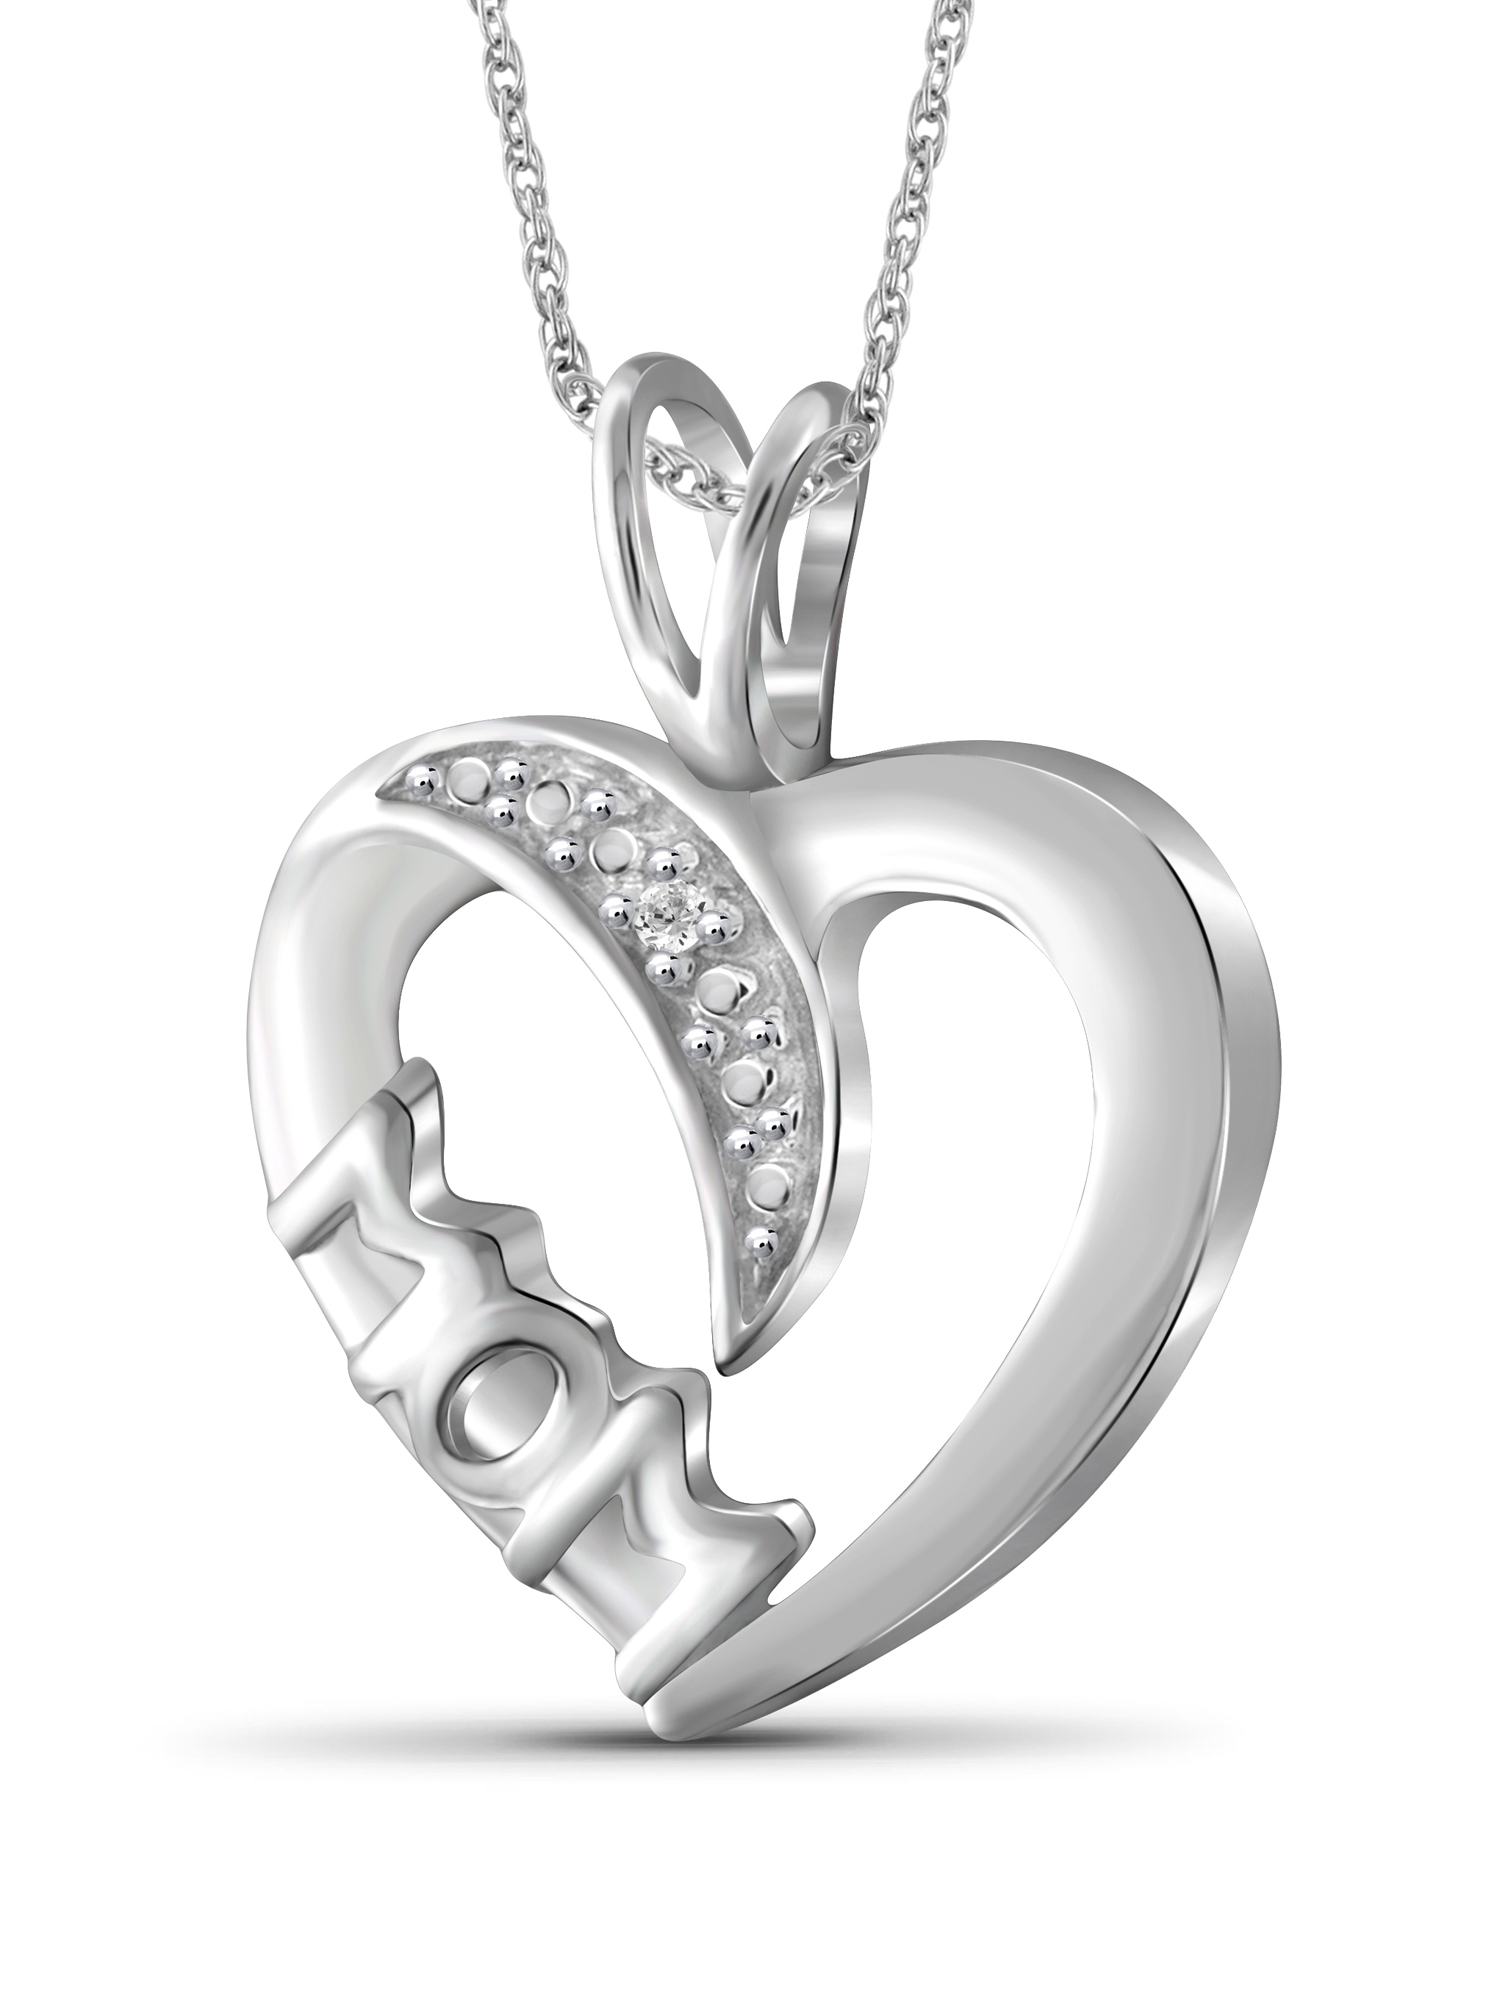 White Diamond Accent Sterling Silver Mother Heart Pendant - image 2 of 5